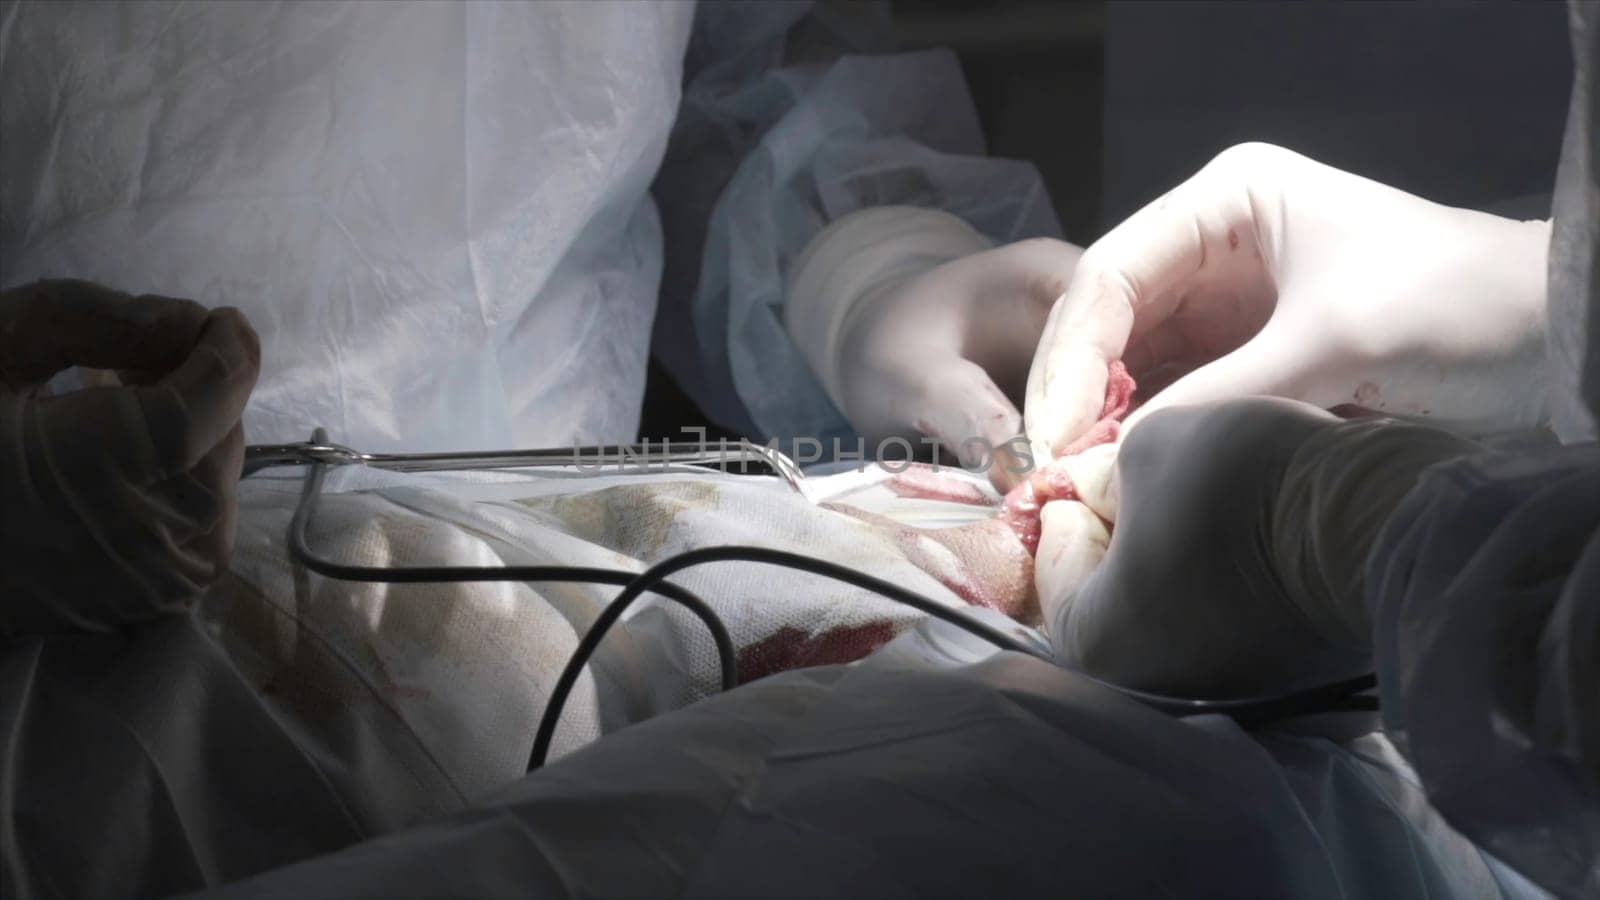 Close up detail of a surgery on male genitals with the professional equipment. Surgeons in sterile suits performing medical procedure, process of prostatectomy.